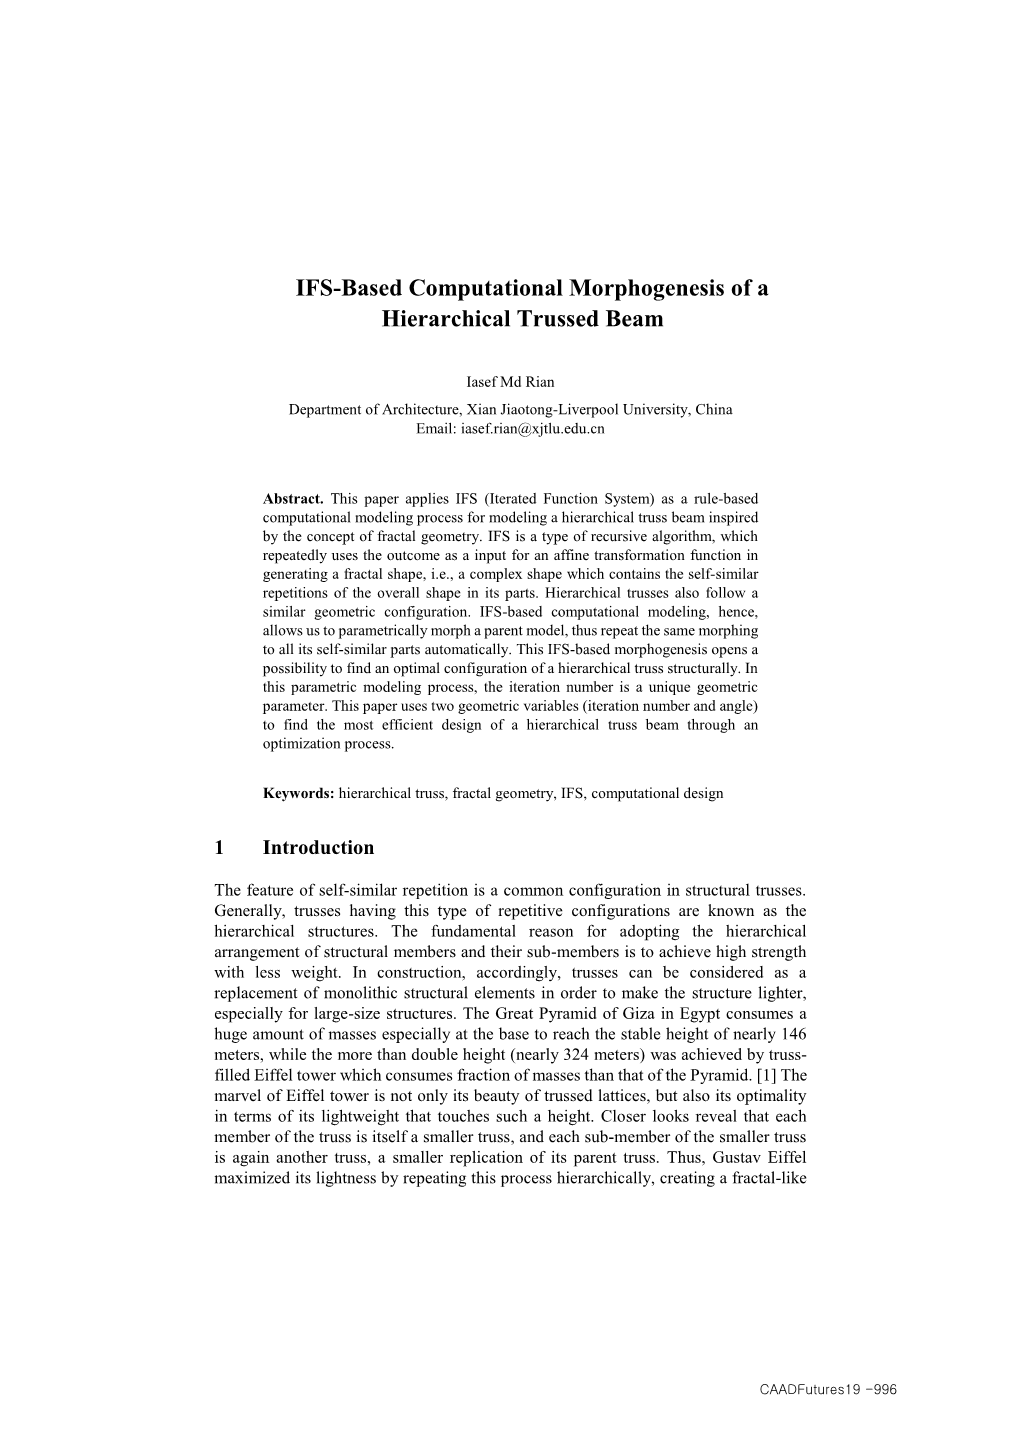 IFS-Based Computational Morphogenesis of a Hierarchical Trussed Beam